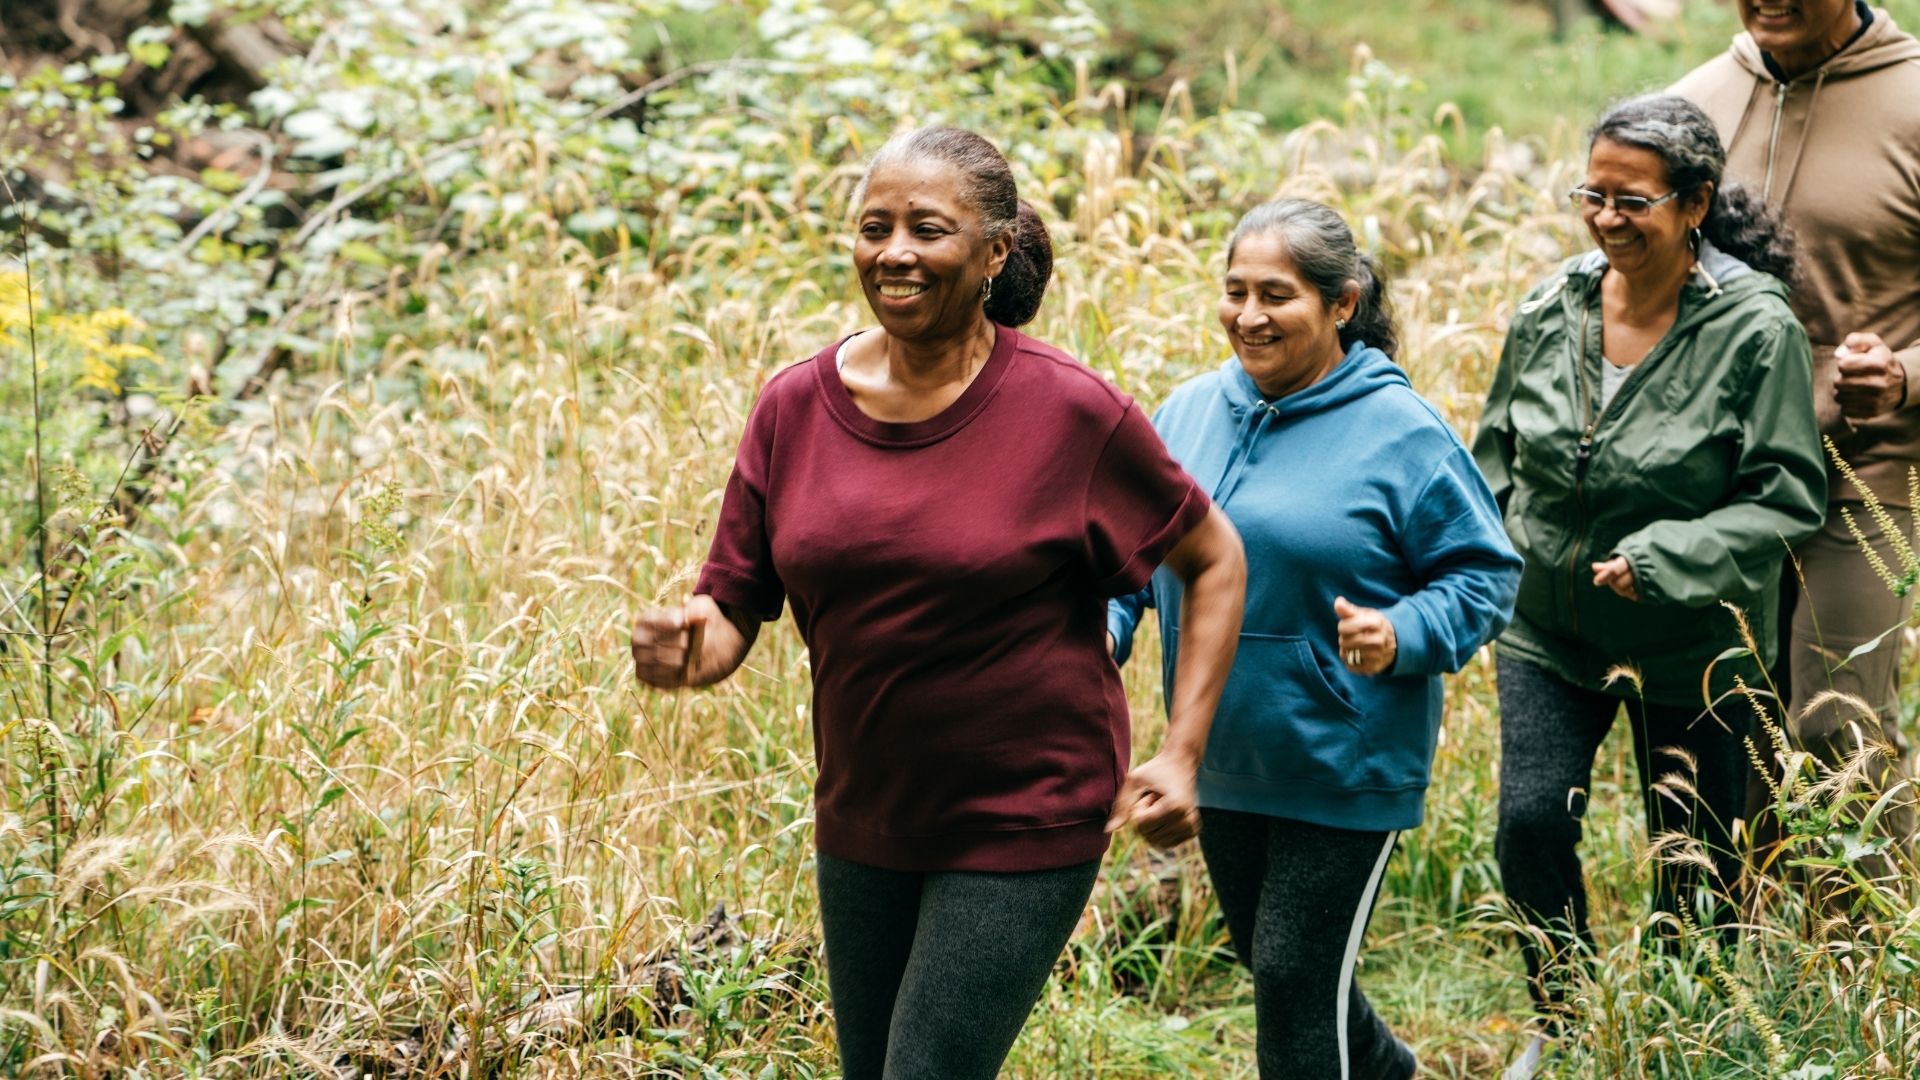 Friends out for a hike together. Make exercise fun. How to eliminate barriers to physical activity for people with brain injuries.